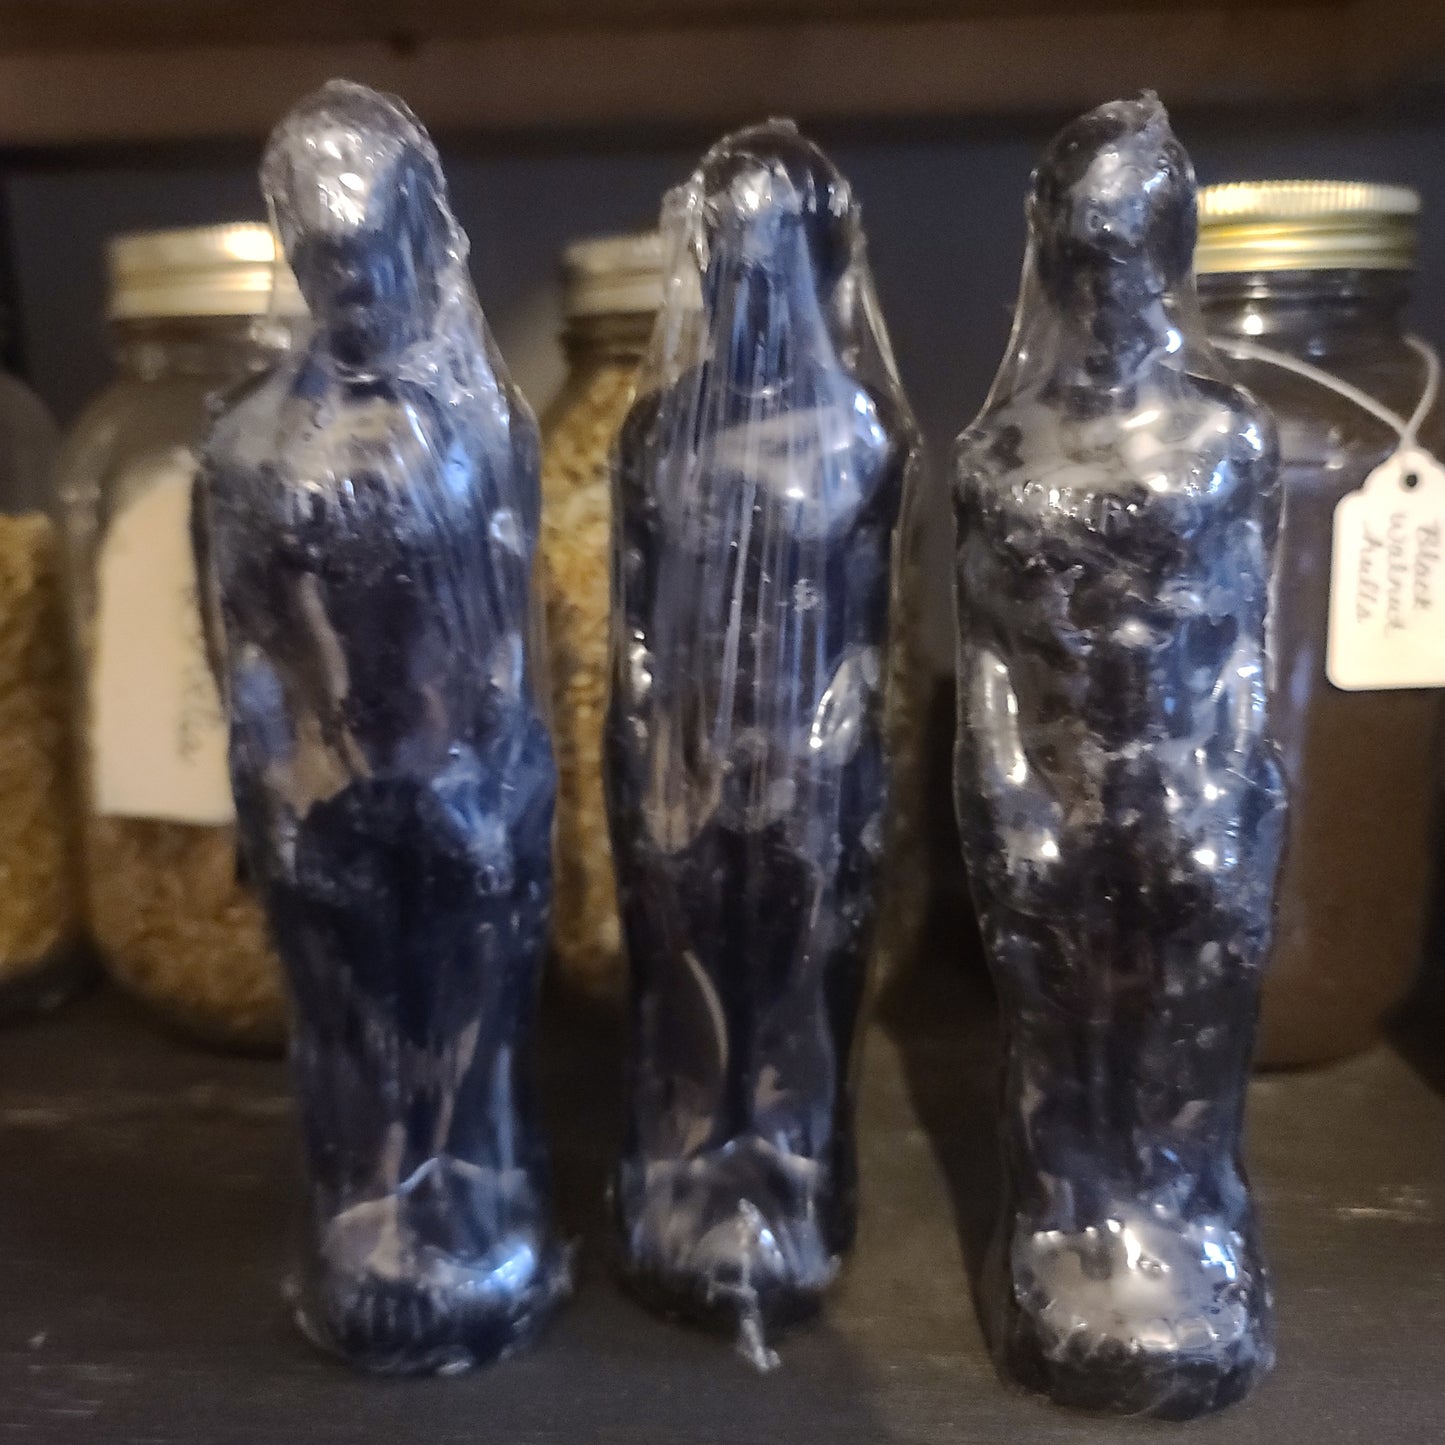 Male Figure Candle (Black) - Protection, Banishing, Wisdom, Absorb/Project Negative Energies, Curses/Binding, Anti-Anxiety/Depression, Self-Love, Masculine Energy, Sympathetic Magick (Poppet Alternative)